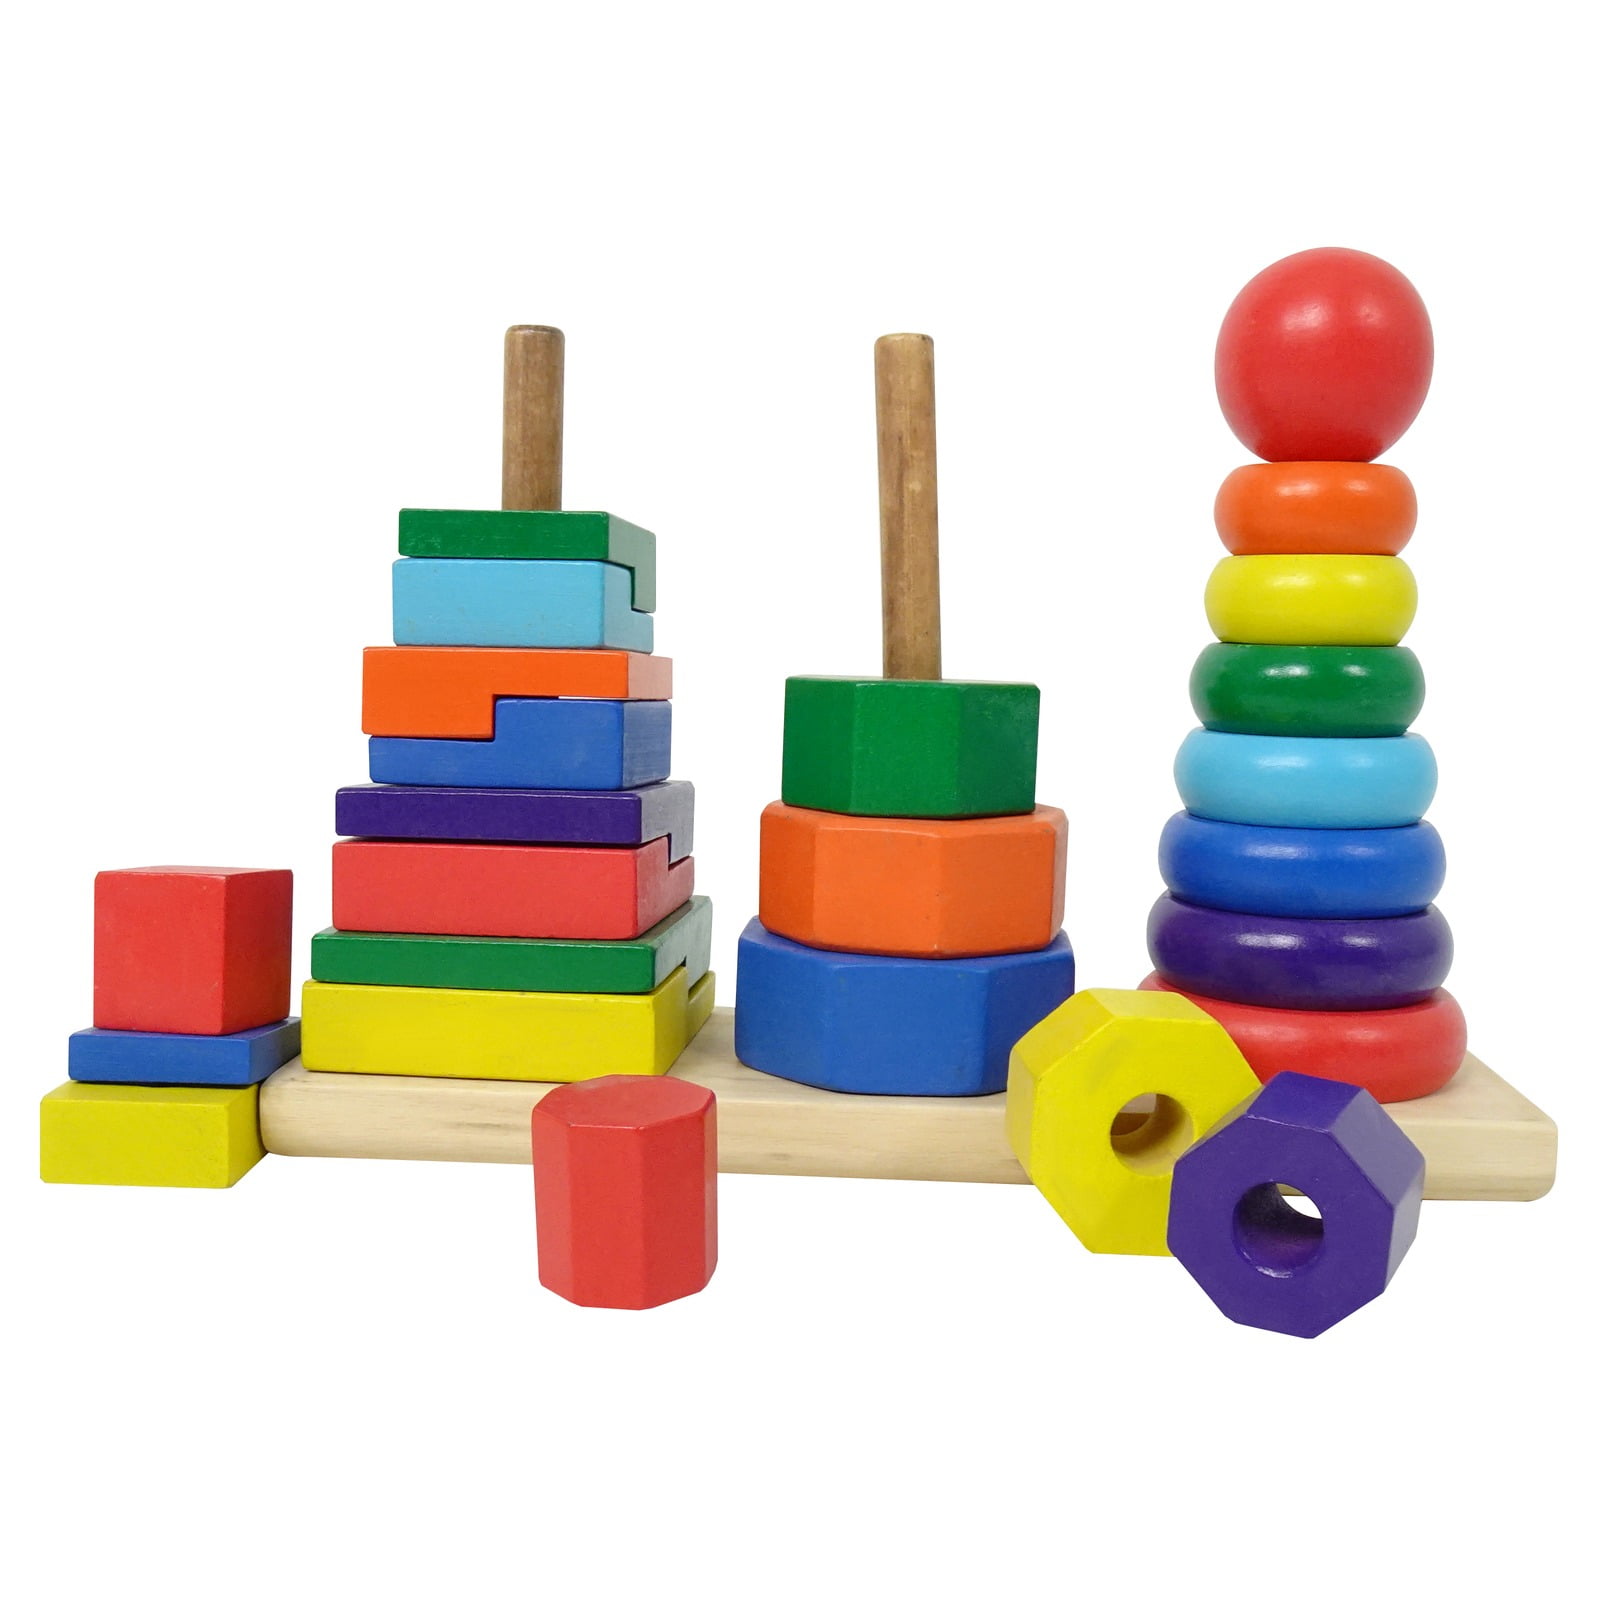 Wooden Rainbow Colorful Stacking Blocks Construction Building Toy Xmas Gift 